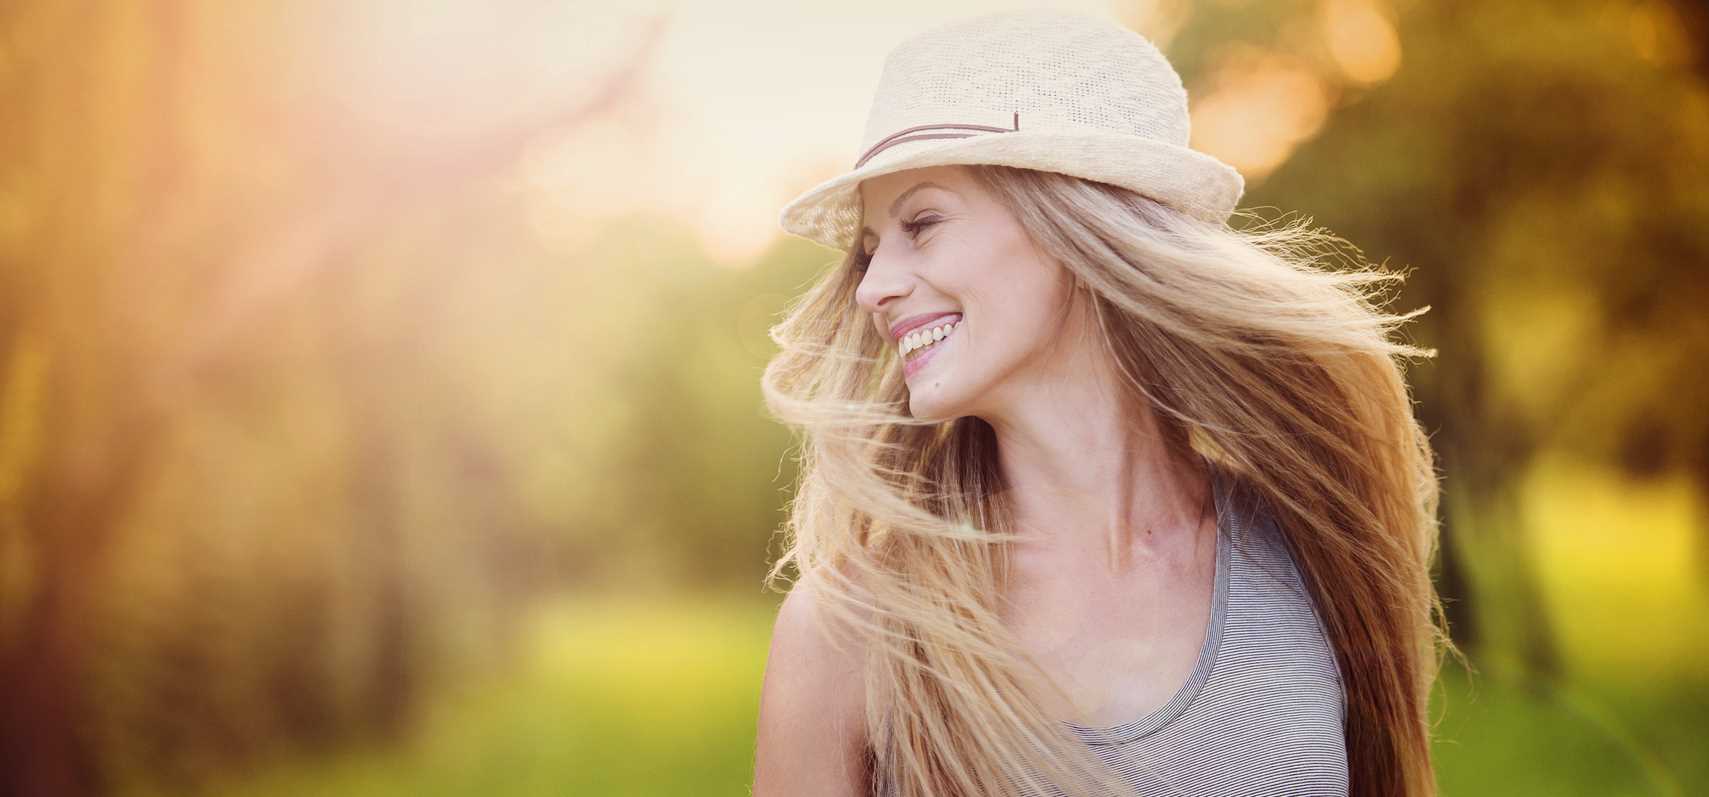 spring woman smiling with hat